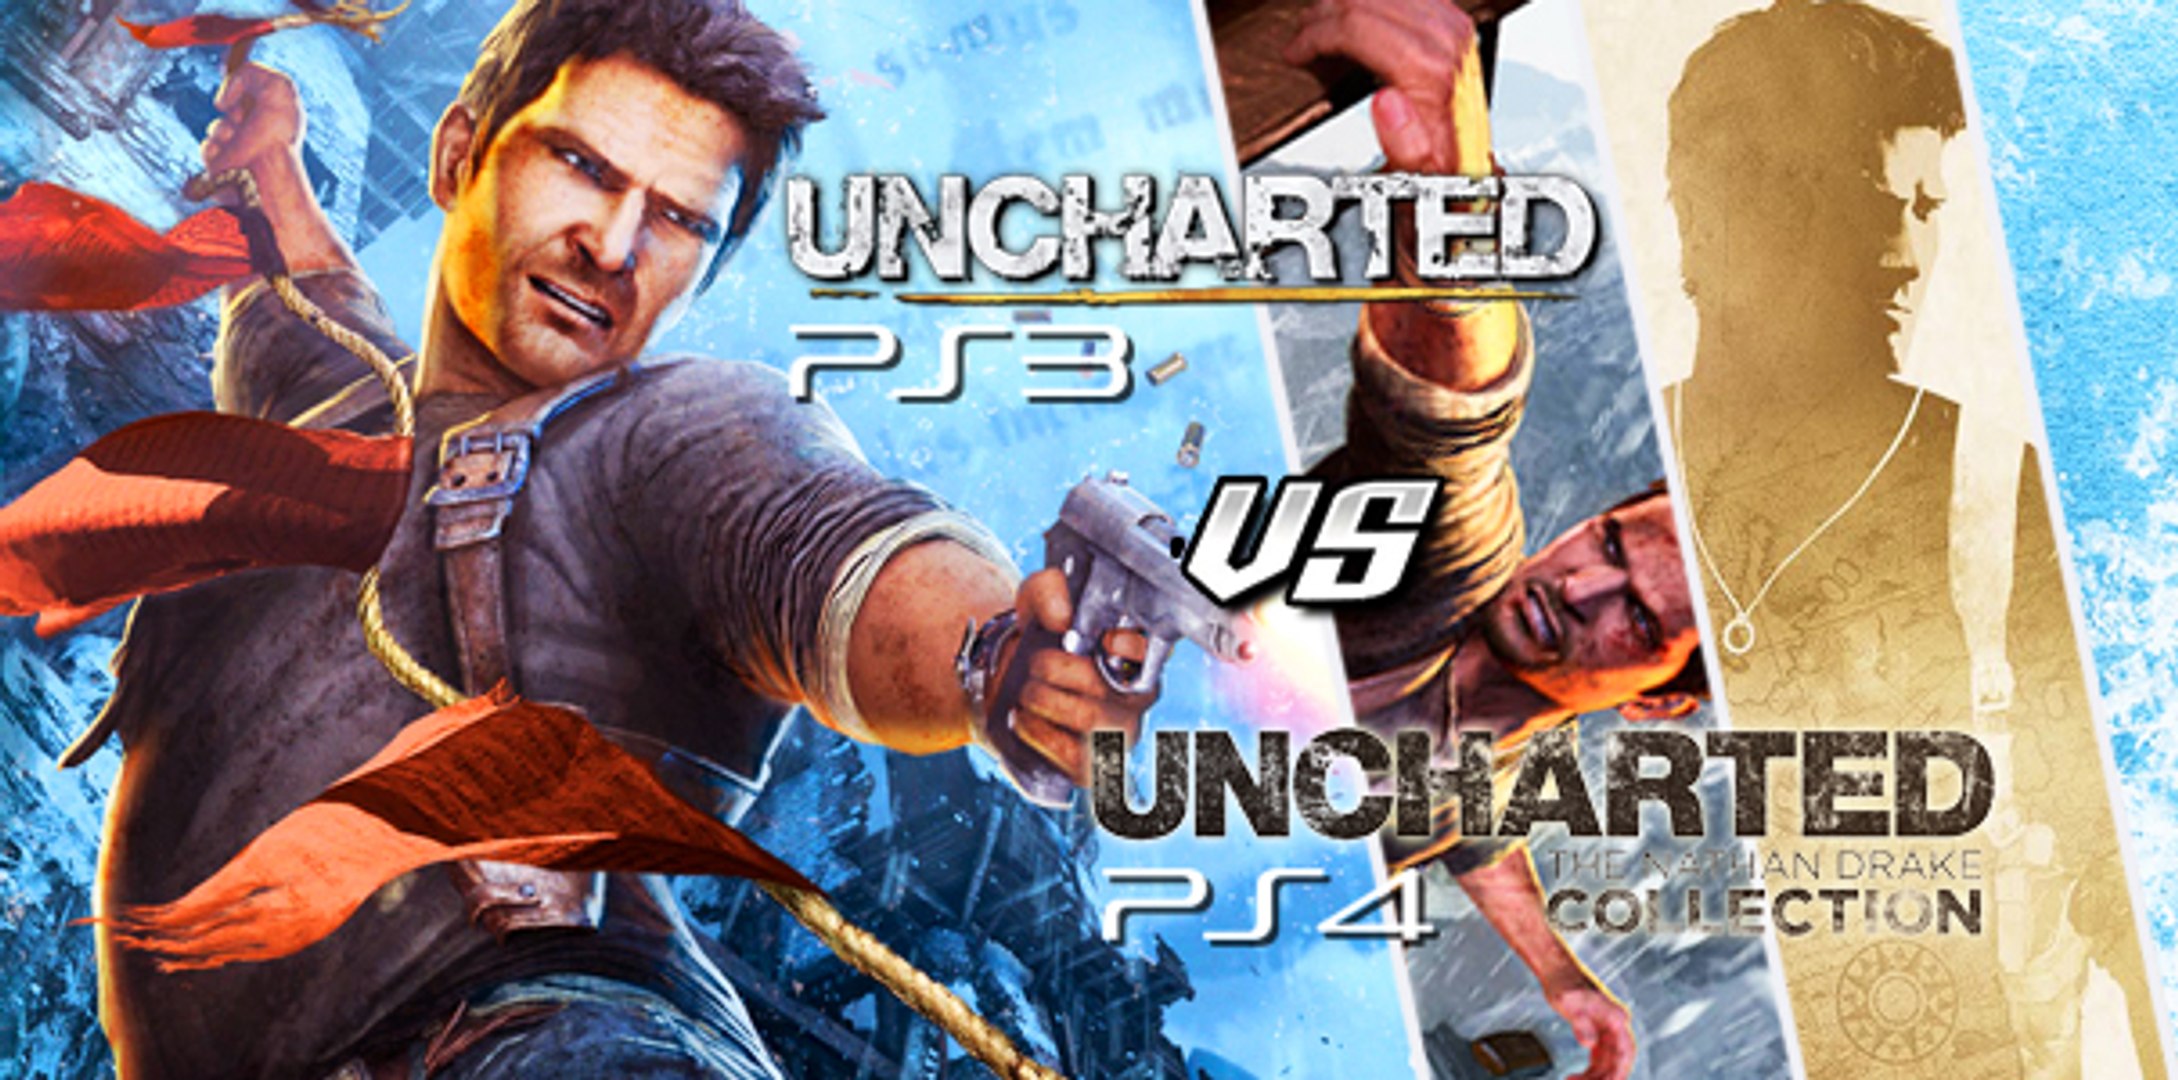 Comparativa Uncharted PS3 vs. PS4 - Vídeo Dailymotion